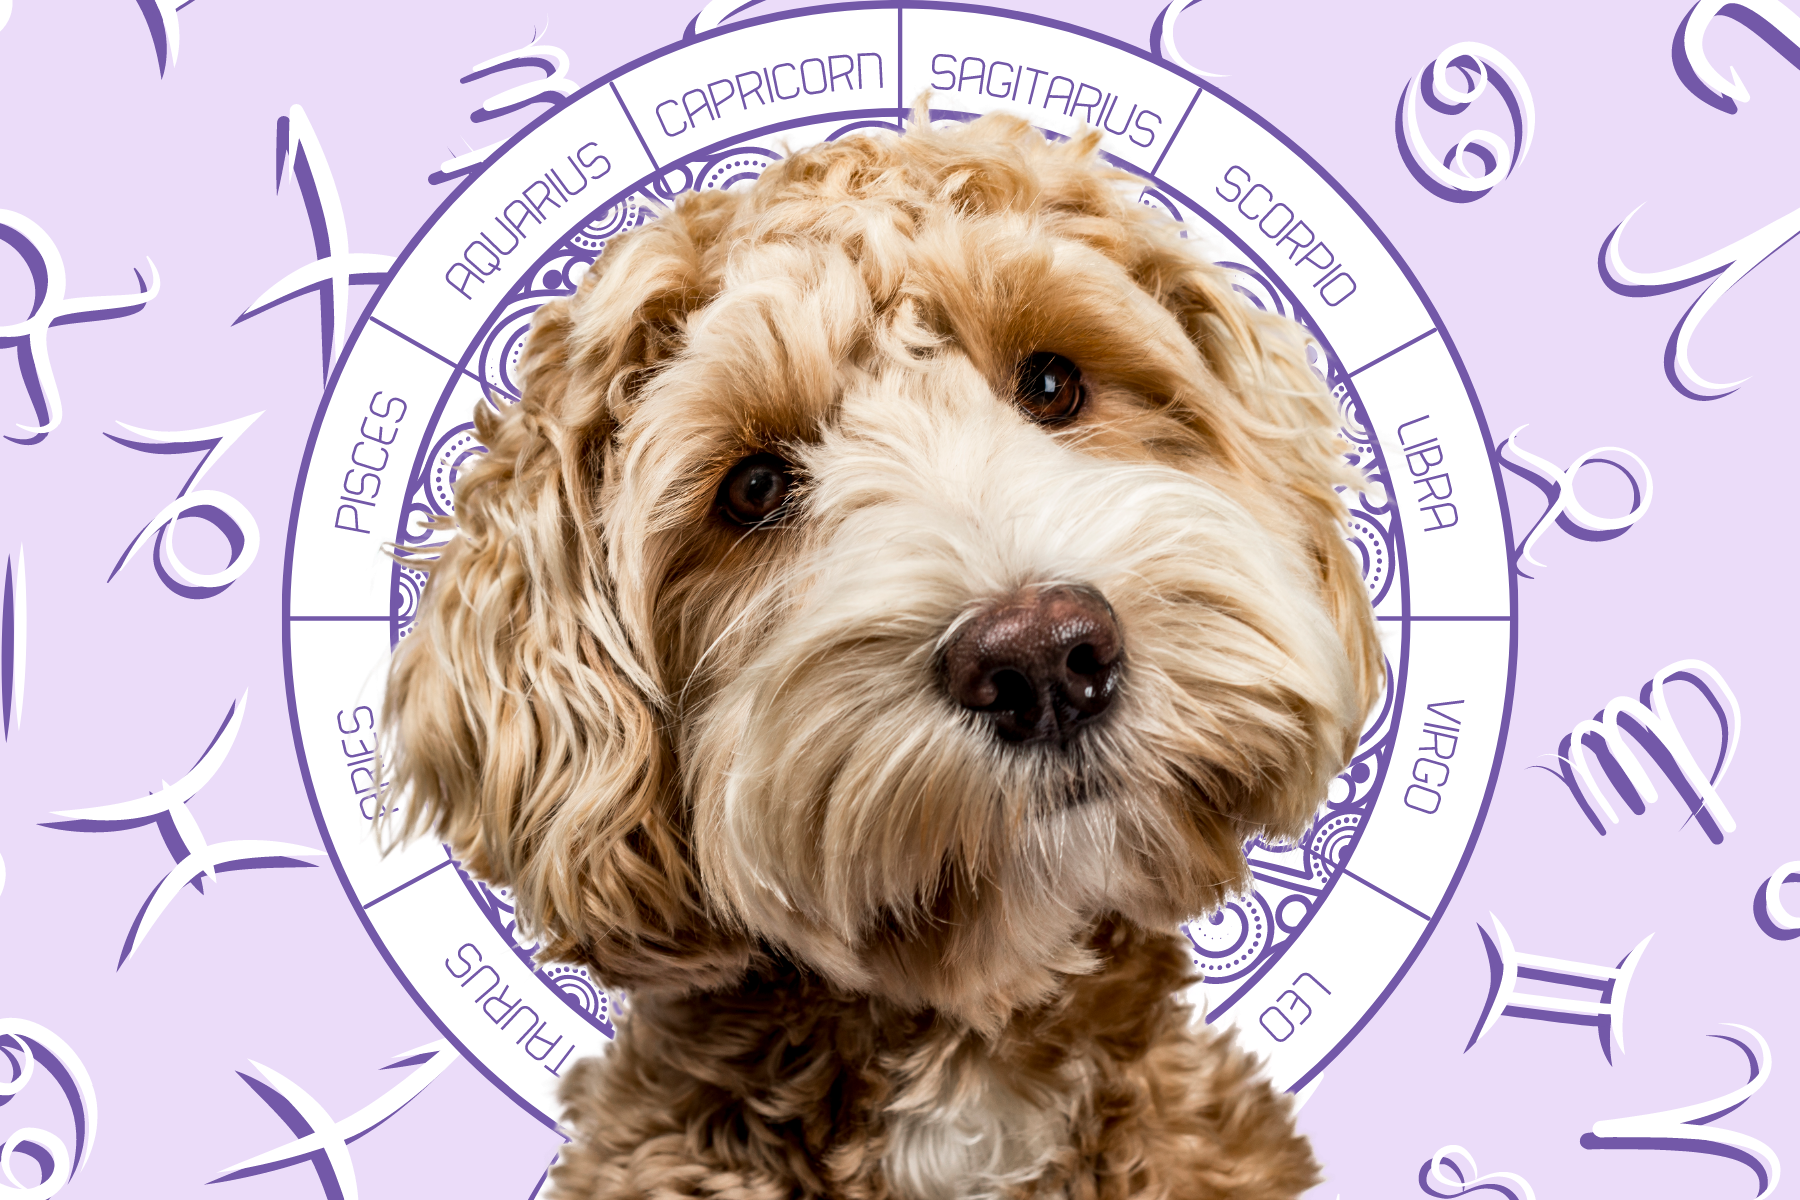 Your Dog's Weekly Horoscope 2020: July 13-19